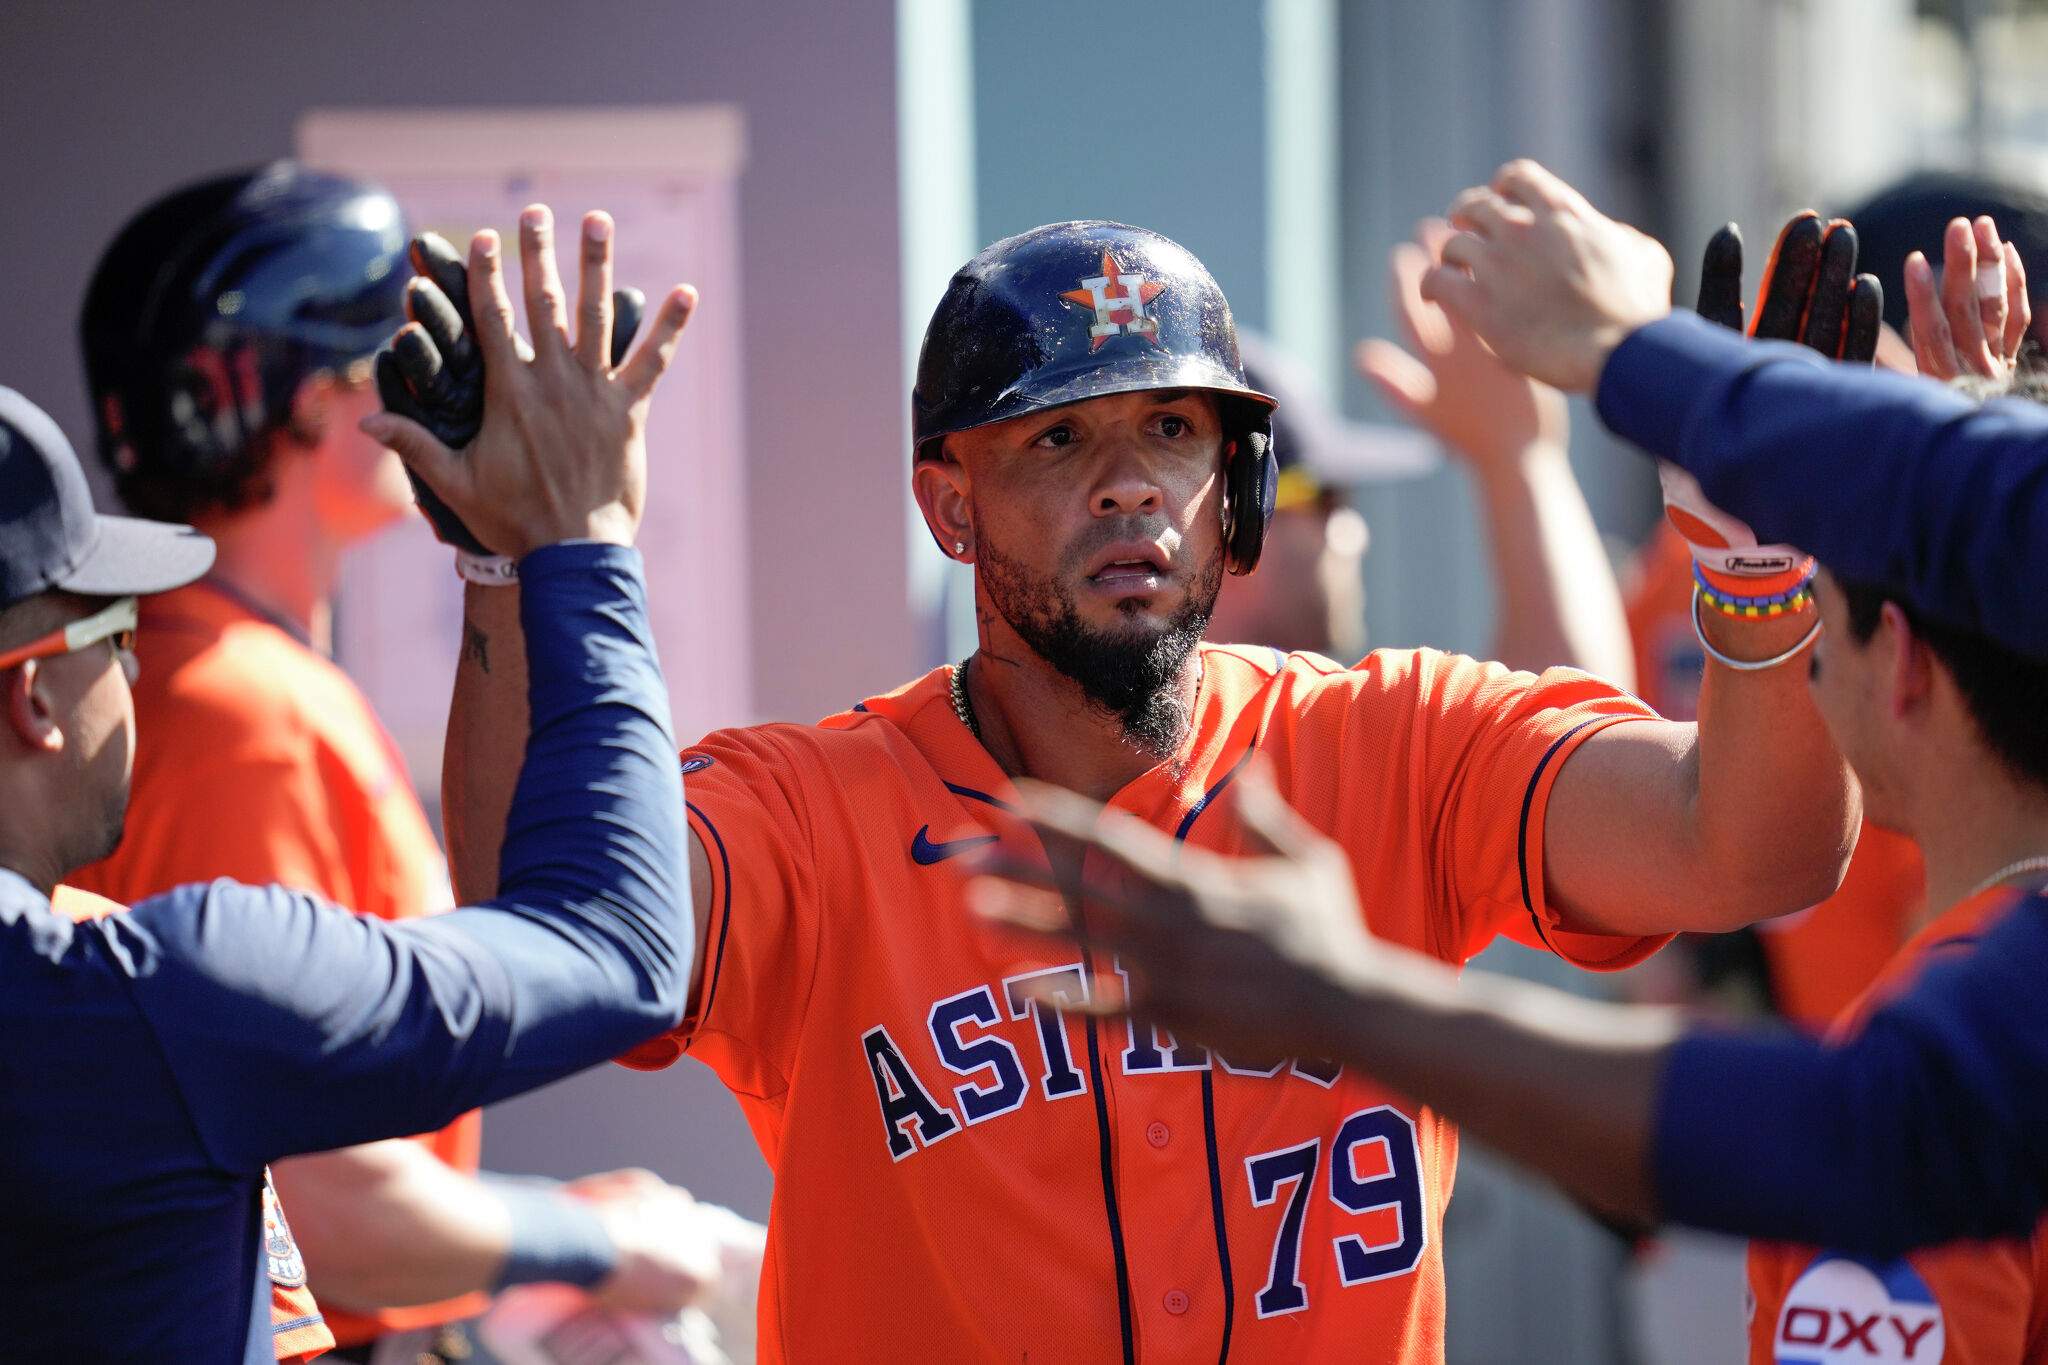 It's Time For the Astros To Bench José Abreu